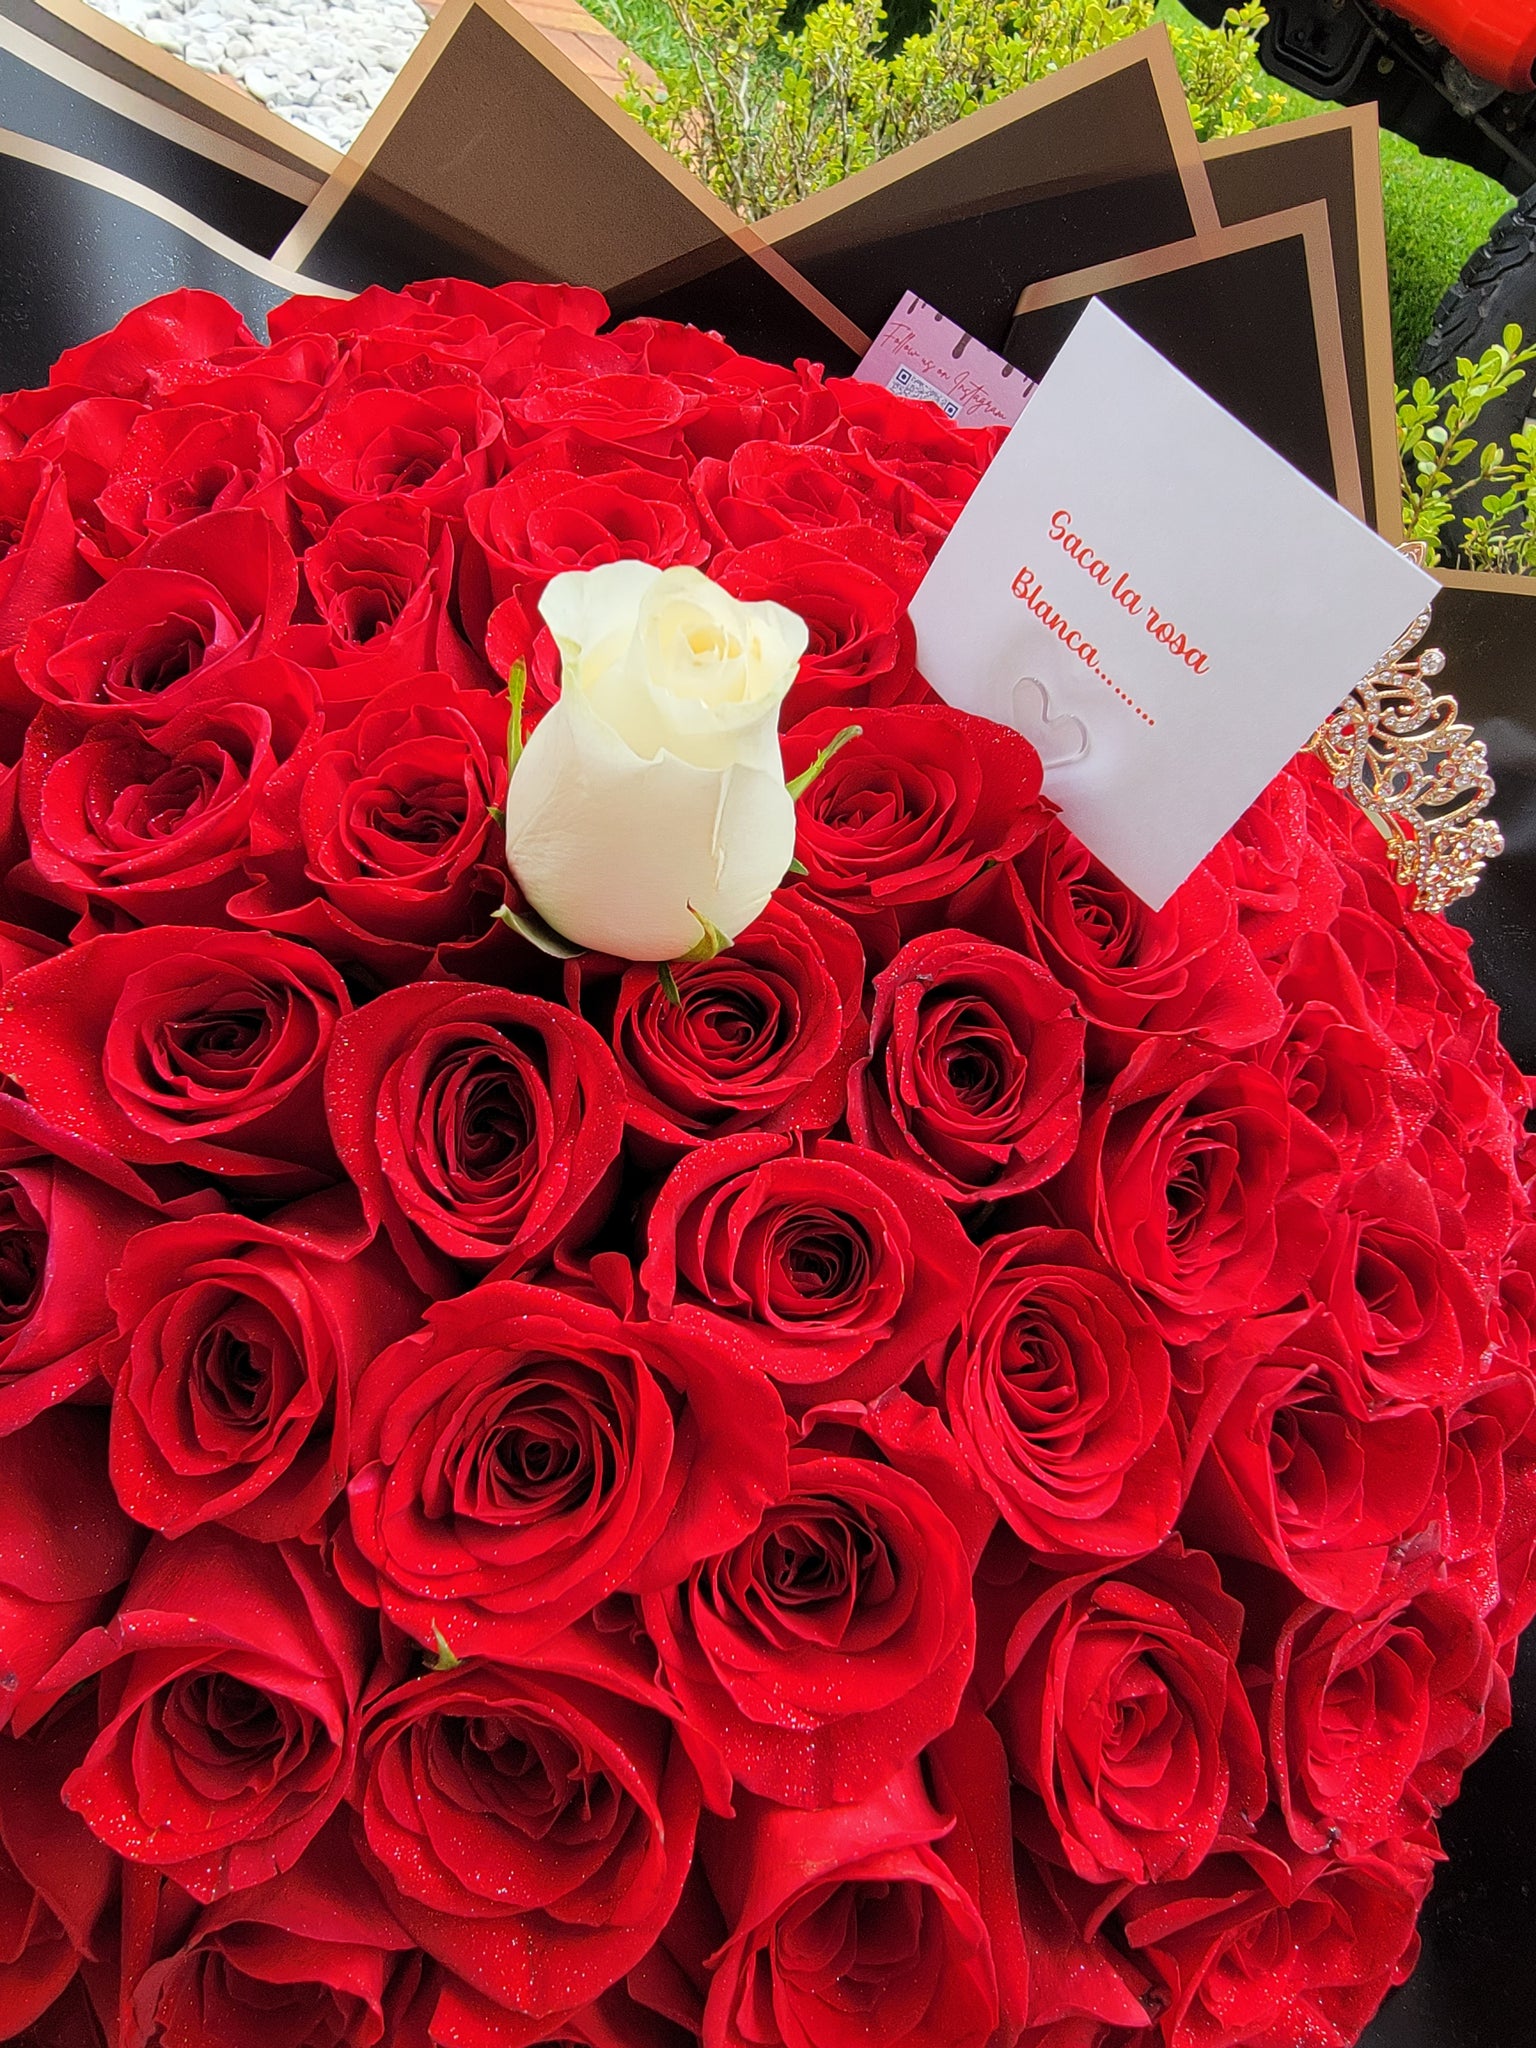 B006 - Personalized 100 Roses Bouquet decorated with a Crown and